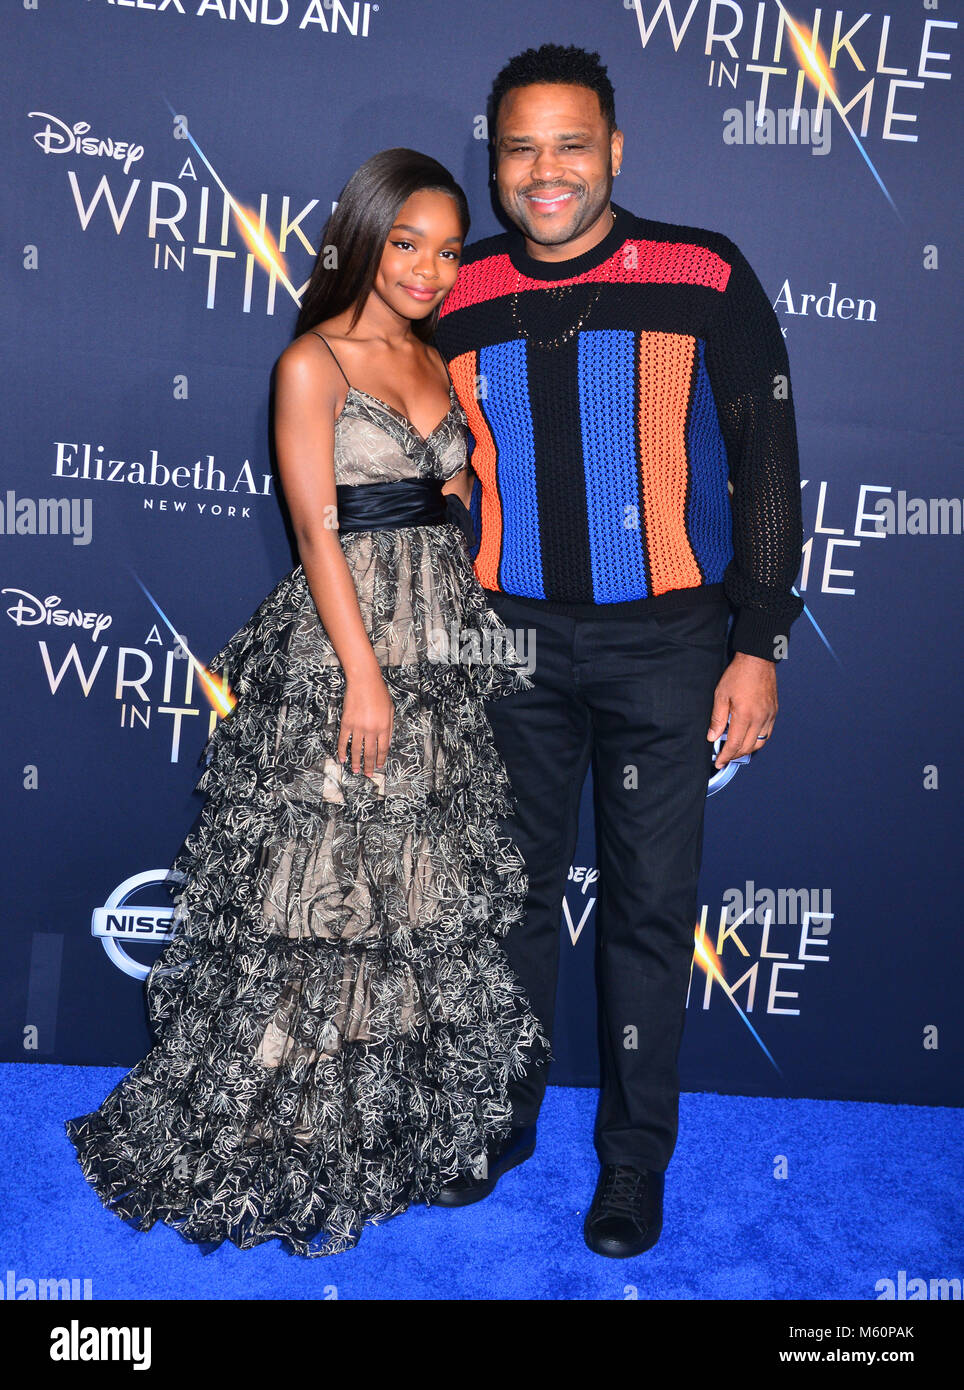 Anthony Anderson , Marsai Martin  arrive at the world premiere of Disney?s 'A Wrinkle in Time' at the El Capitan Theatre in Hollywood CA, Feb 26, 2018 Credit: Tsuni / USA/Alamy Live News Stock Photo